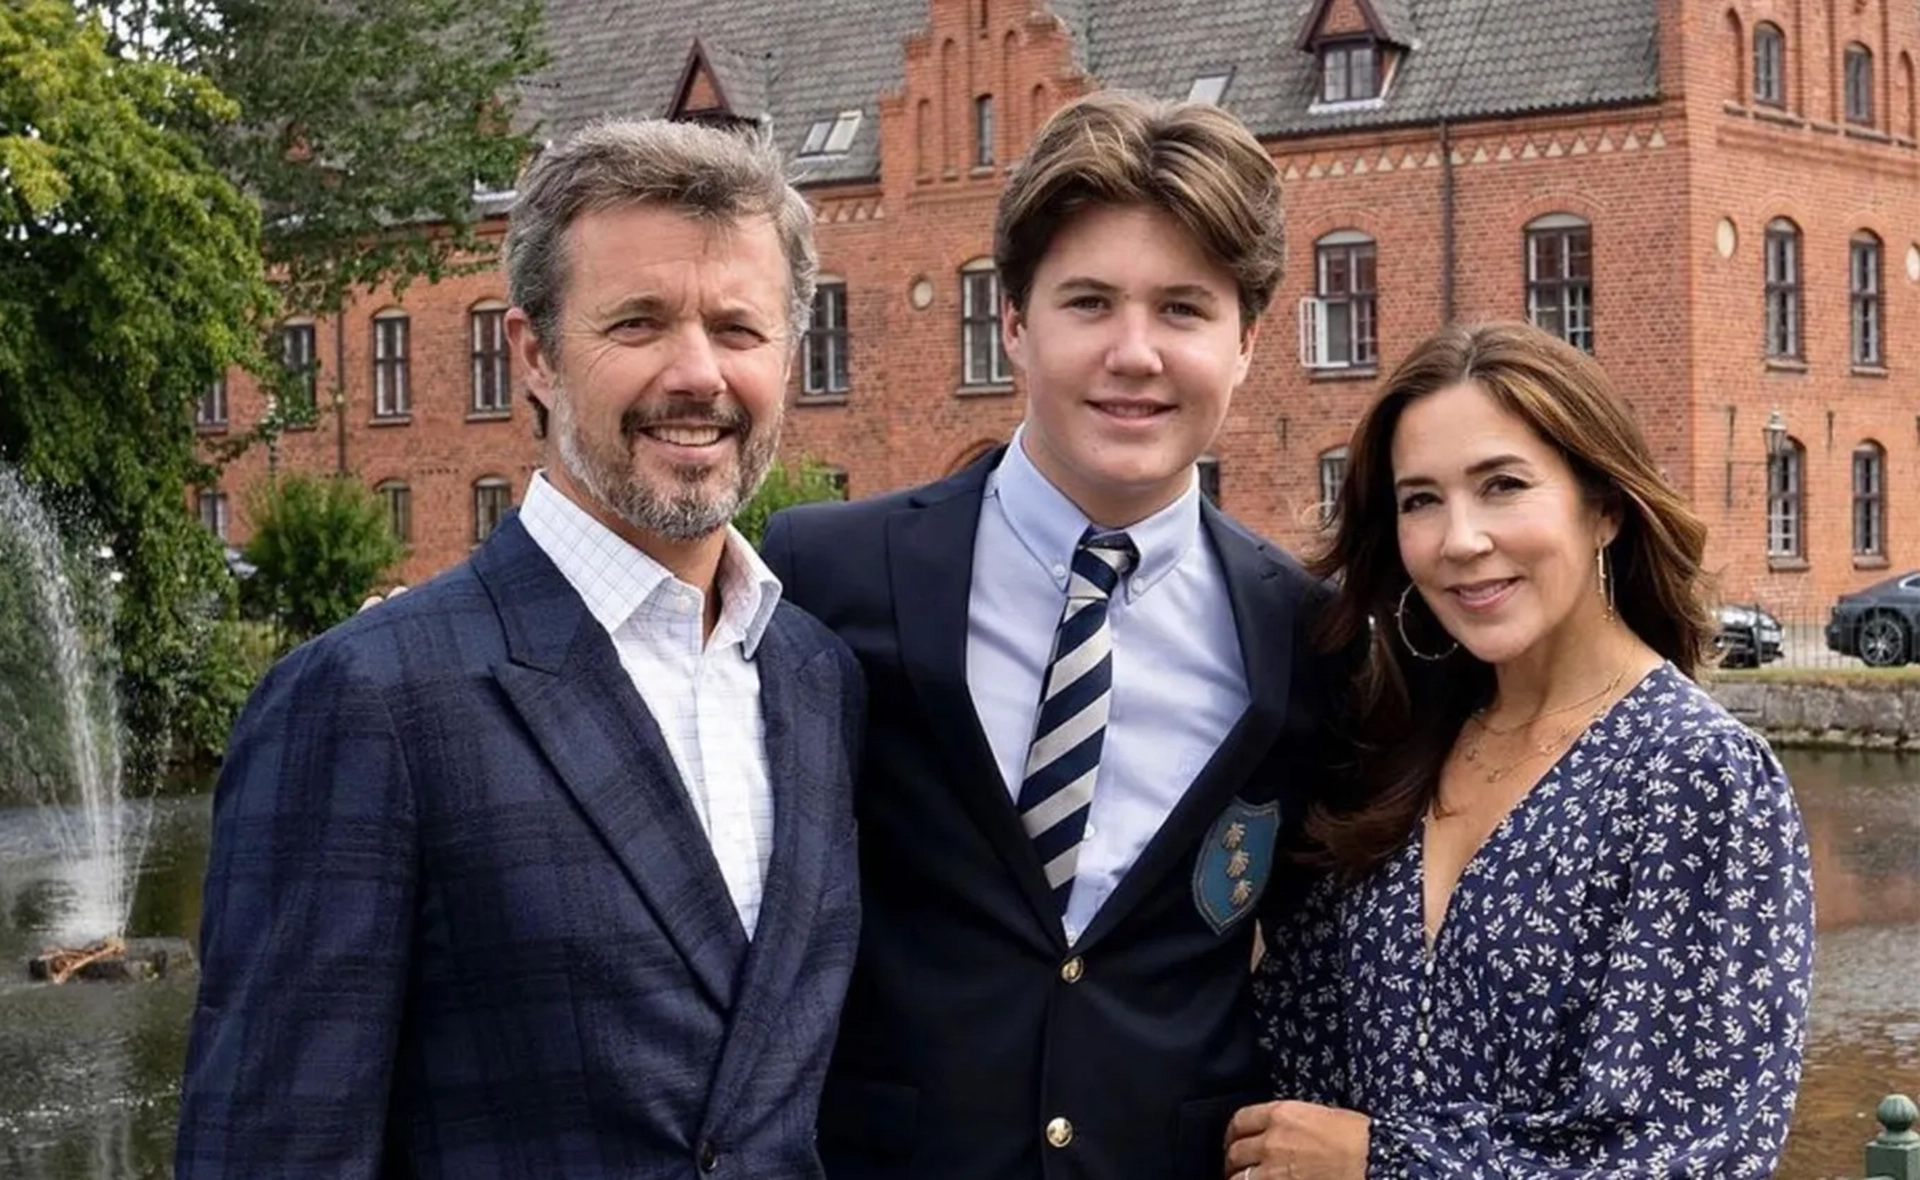 Princess Mary and Prince Frederik respond to explosive bullying claims at son Prince Christian’s elite boarding school